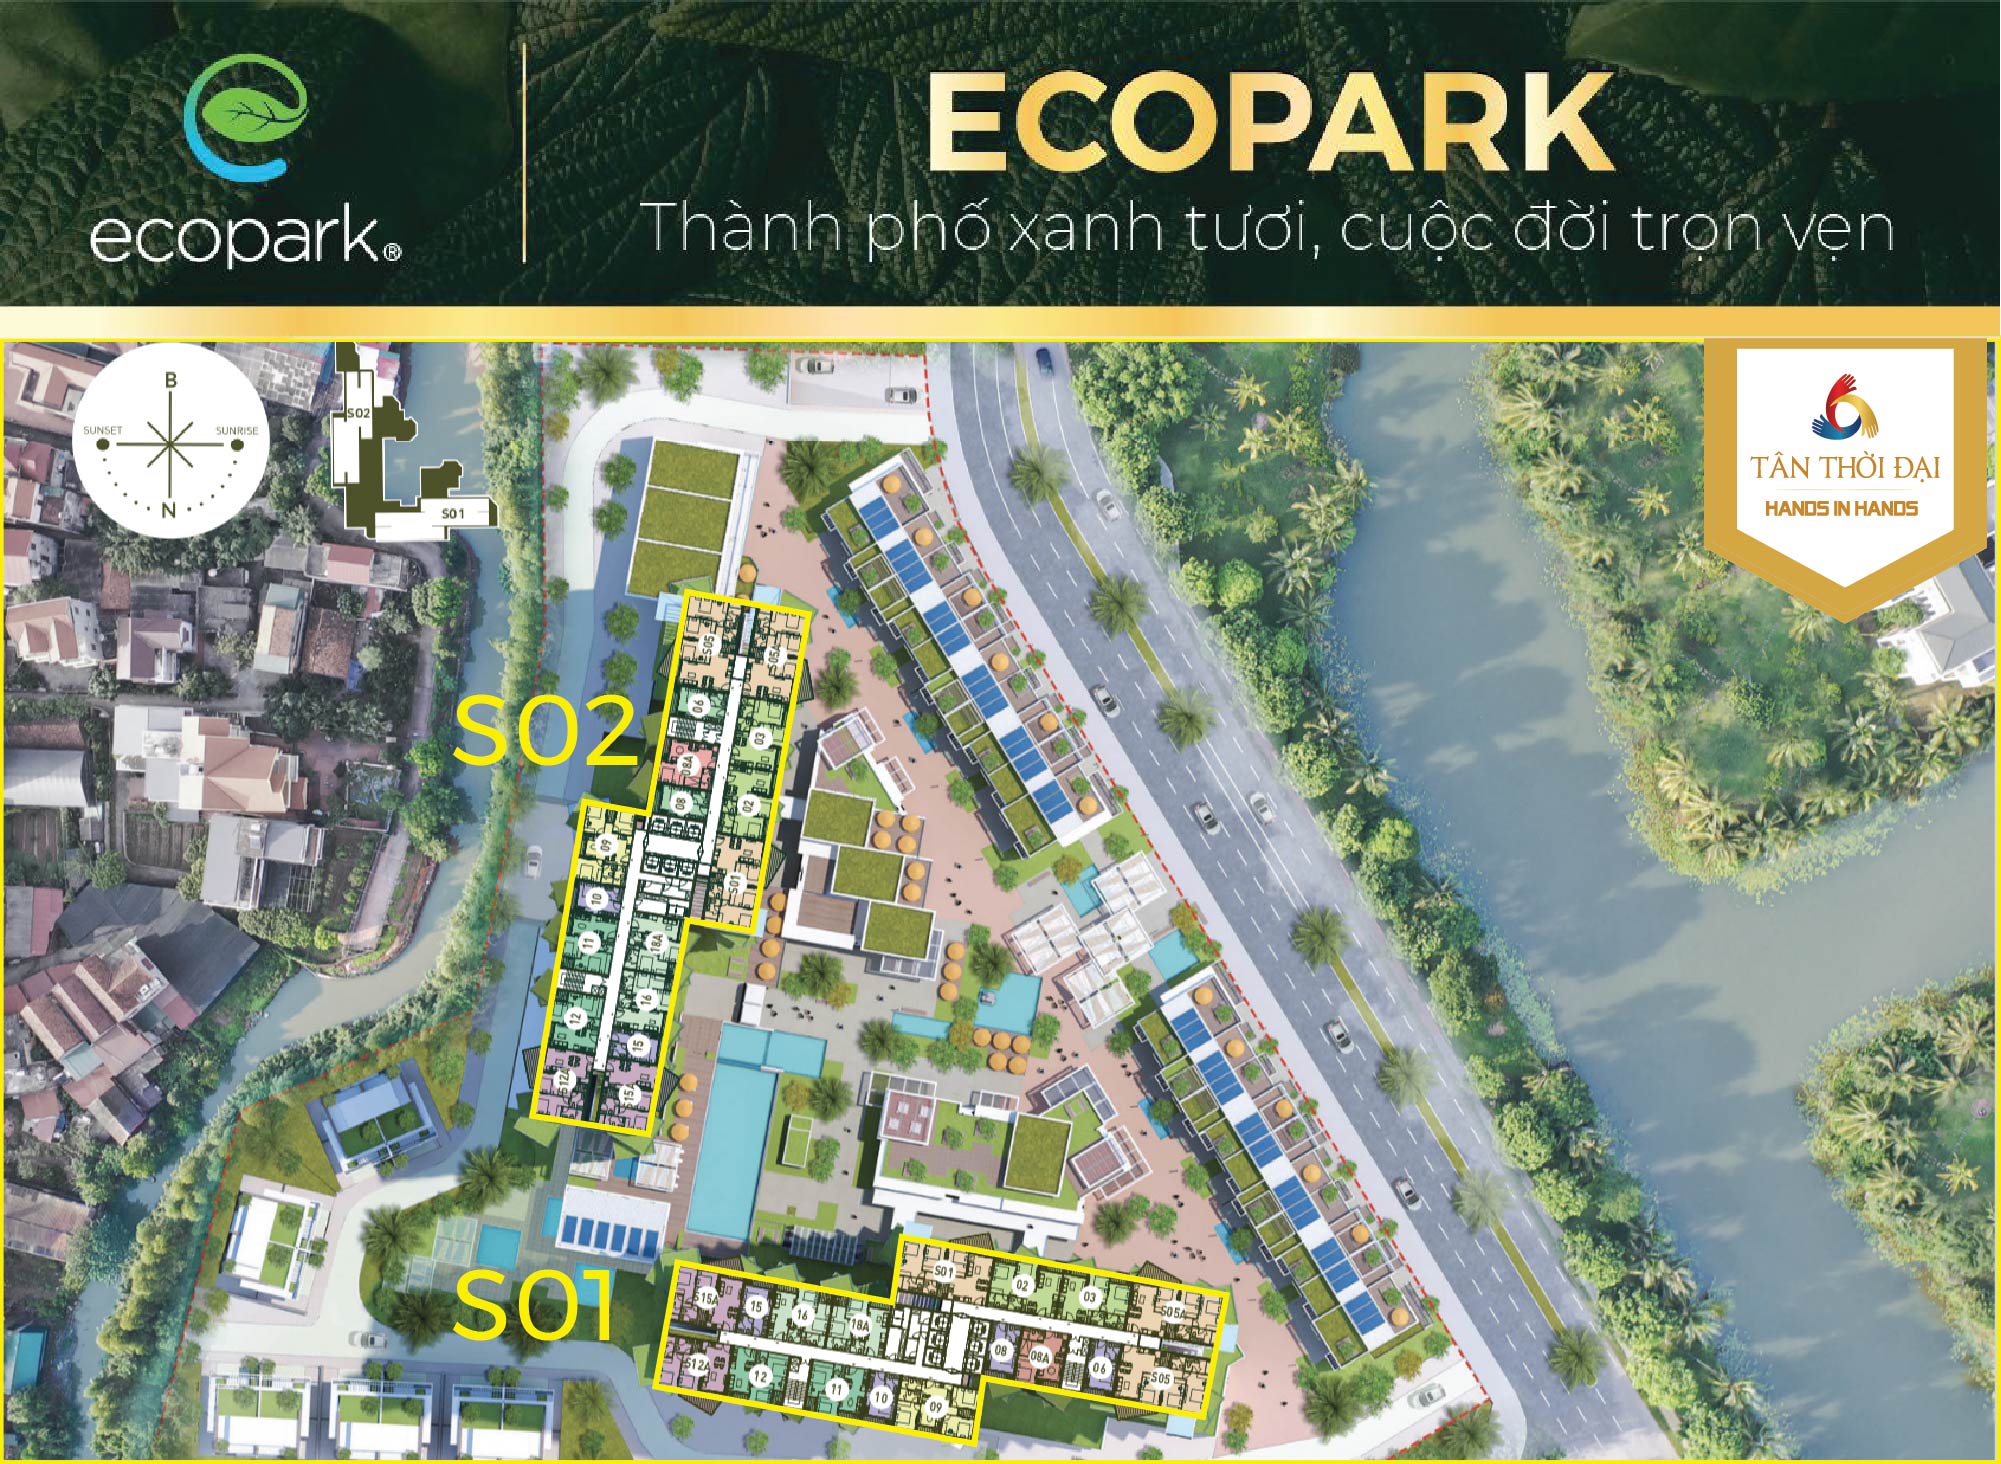 Vị trí Sol Forest Ecopark